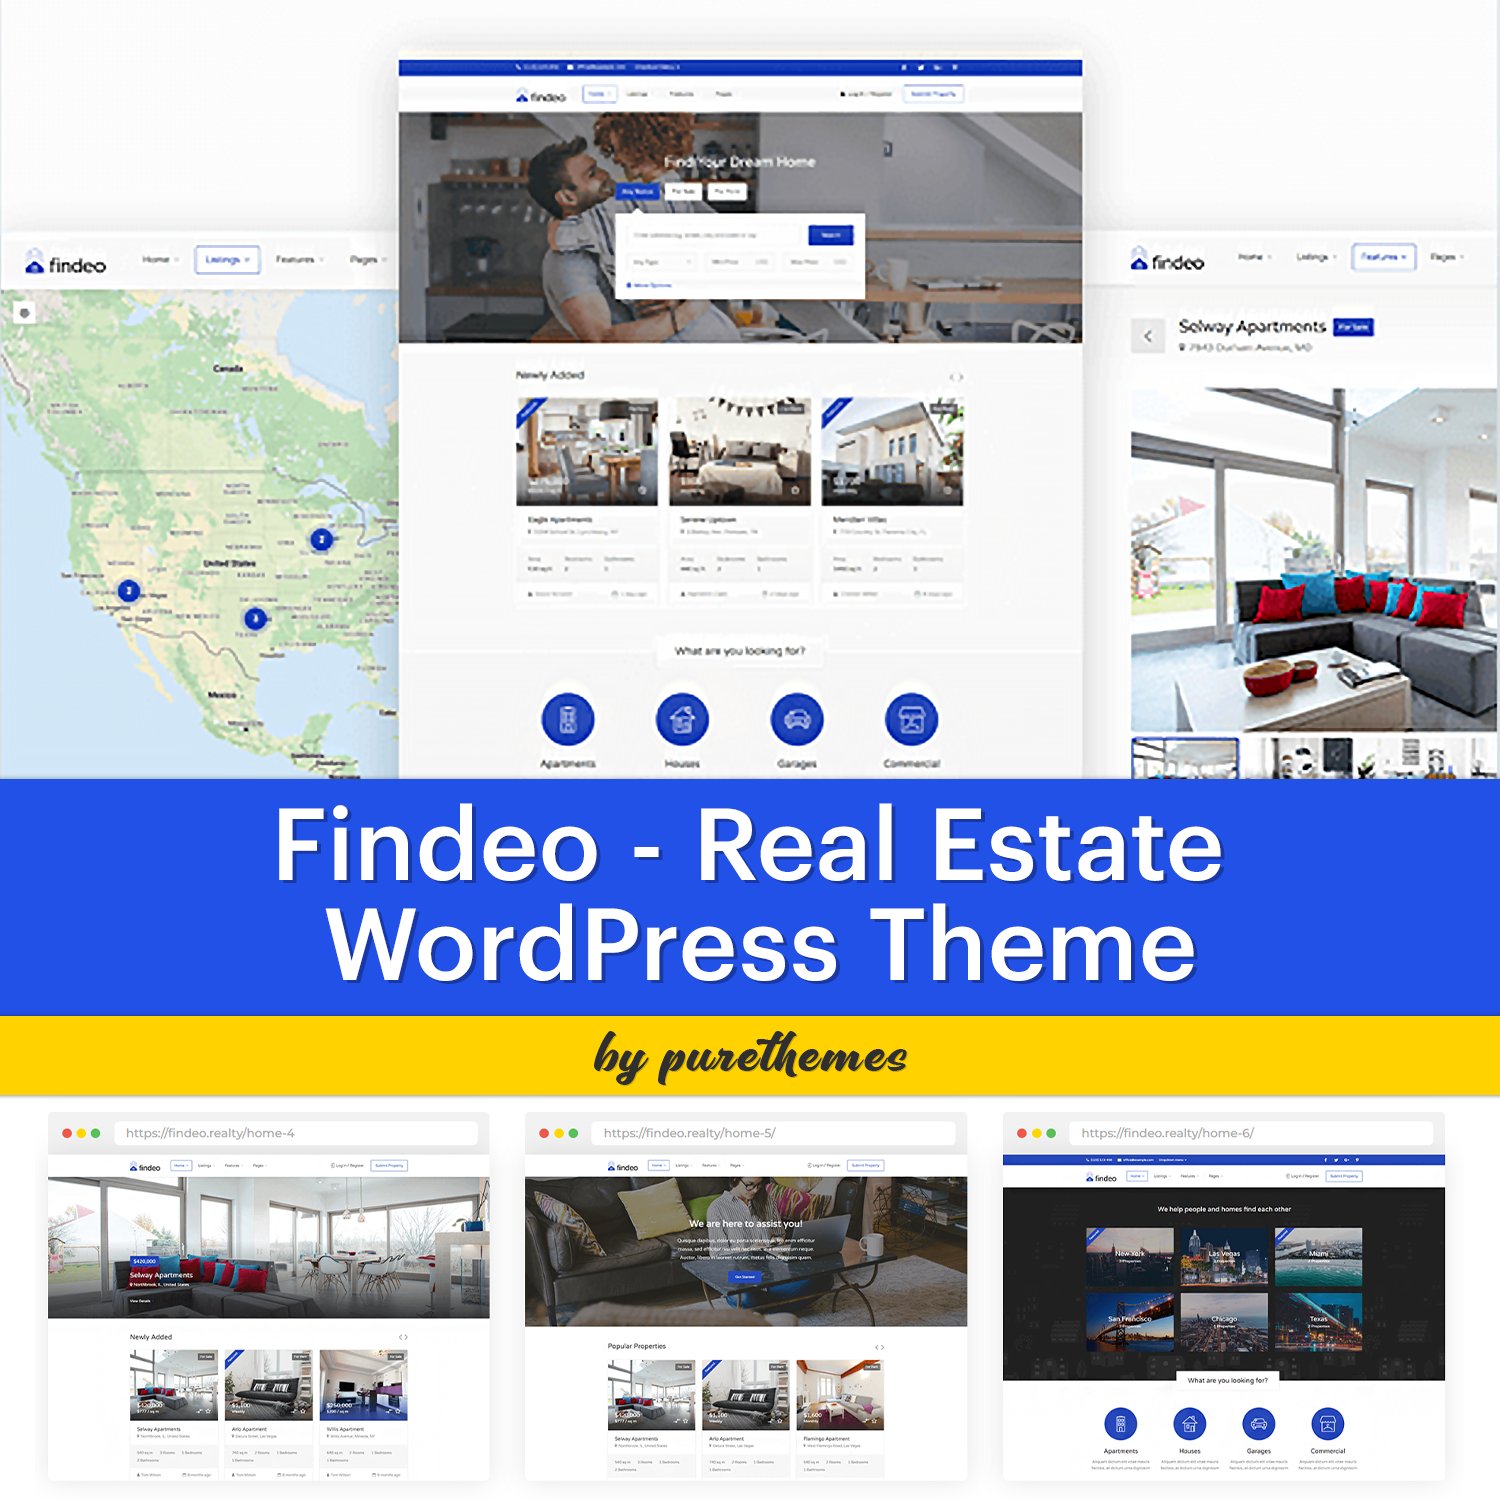 Preview findeo real estate wordpress theme.